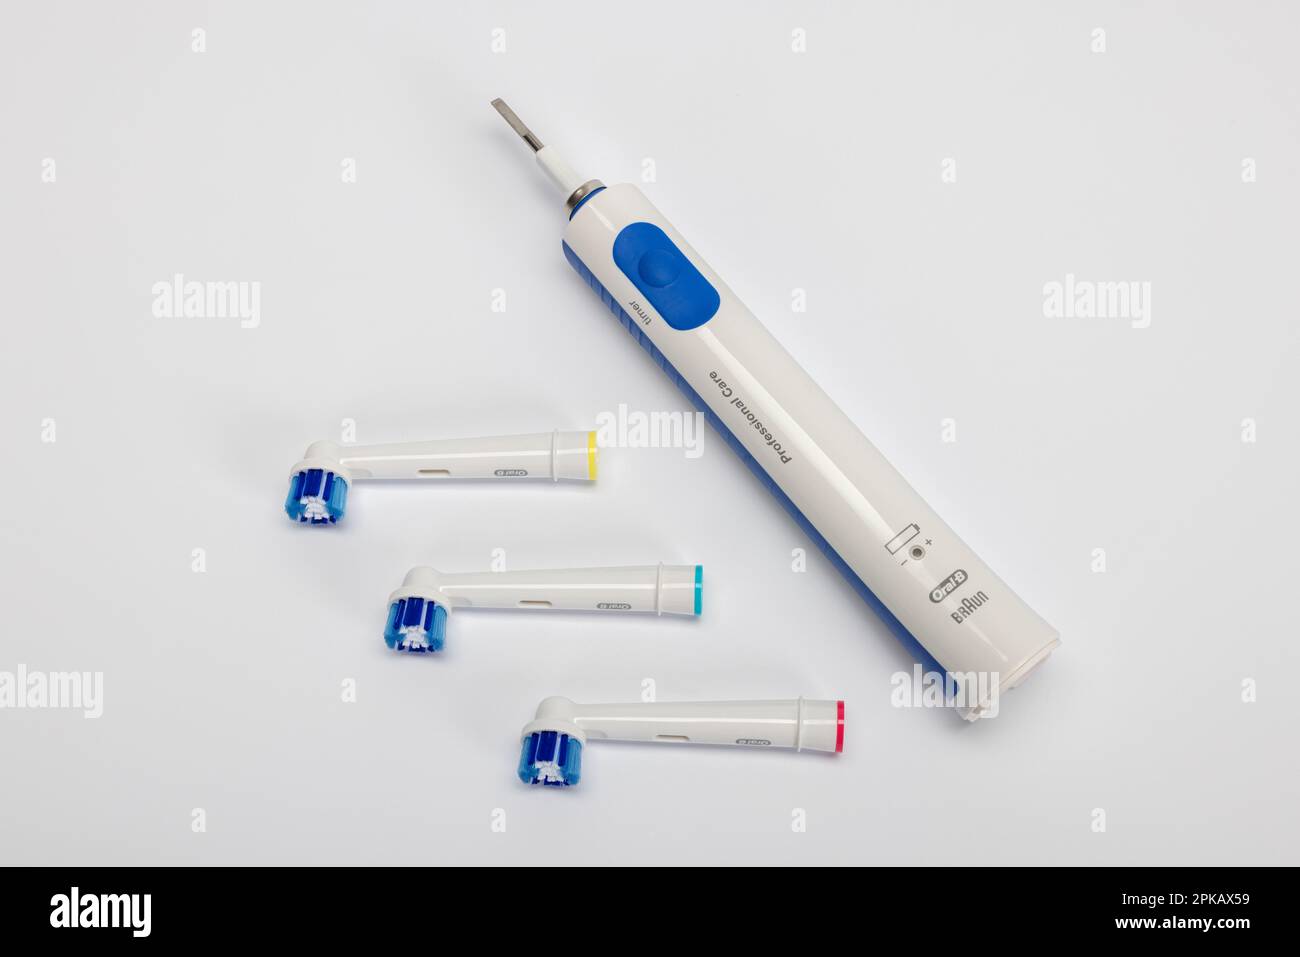 Braun Oral B Type 4729 blue and white electric toothbrush, three replacement  brushes, white background Stock Photo - Alamy